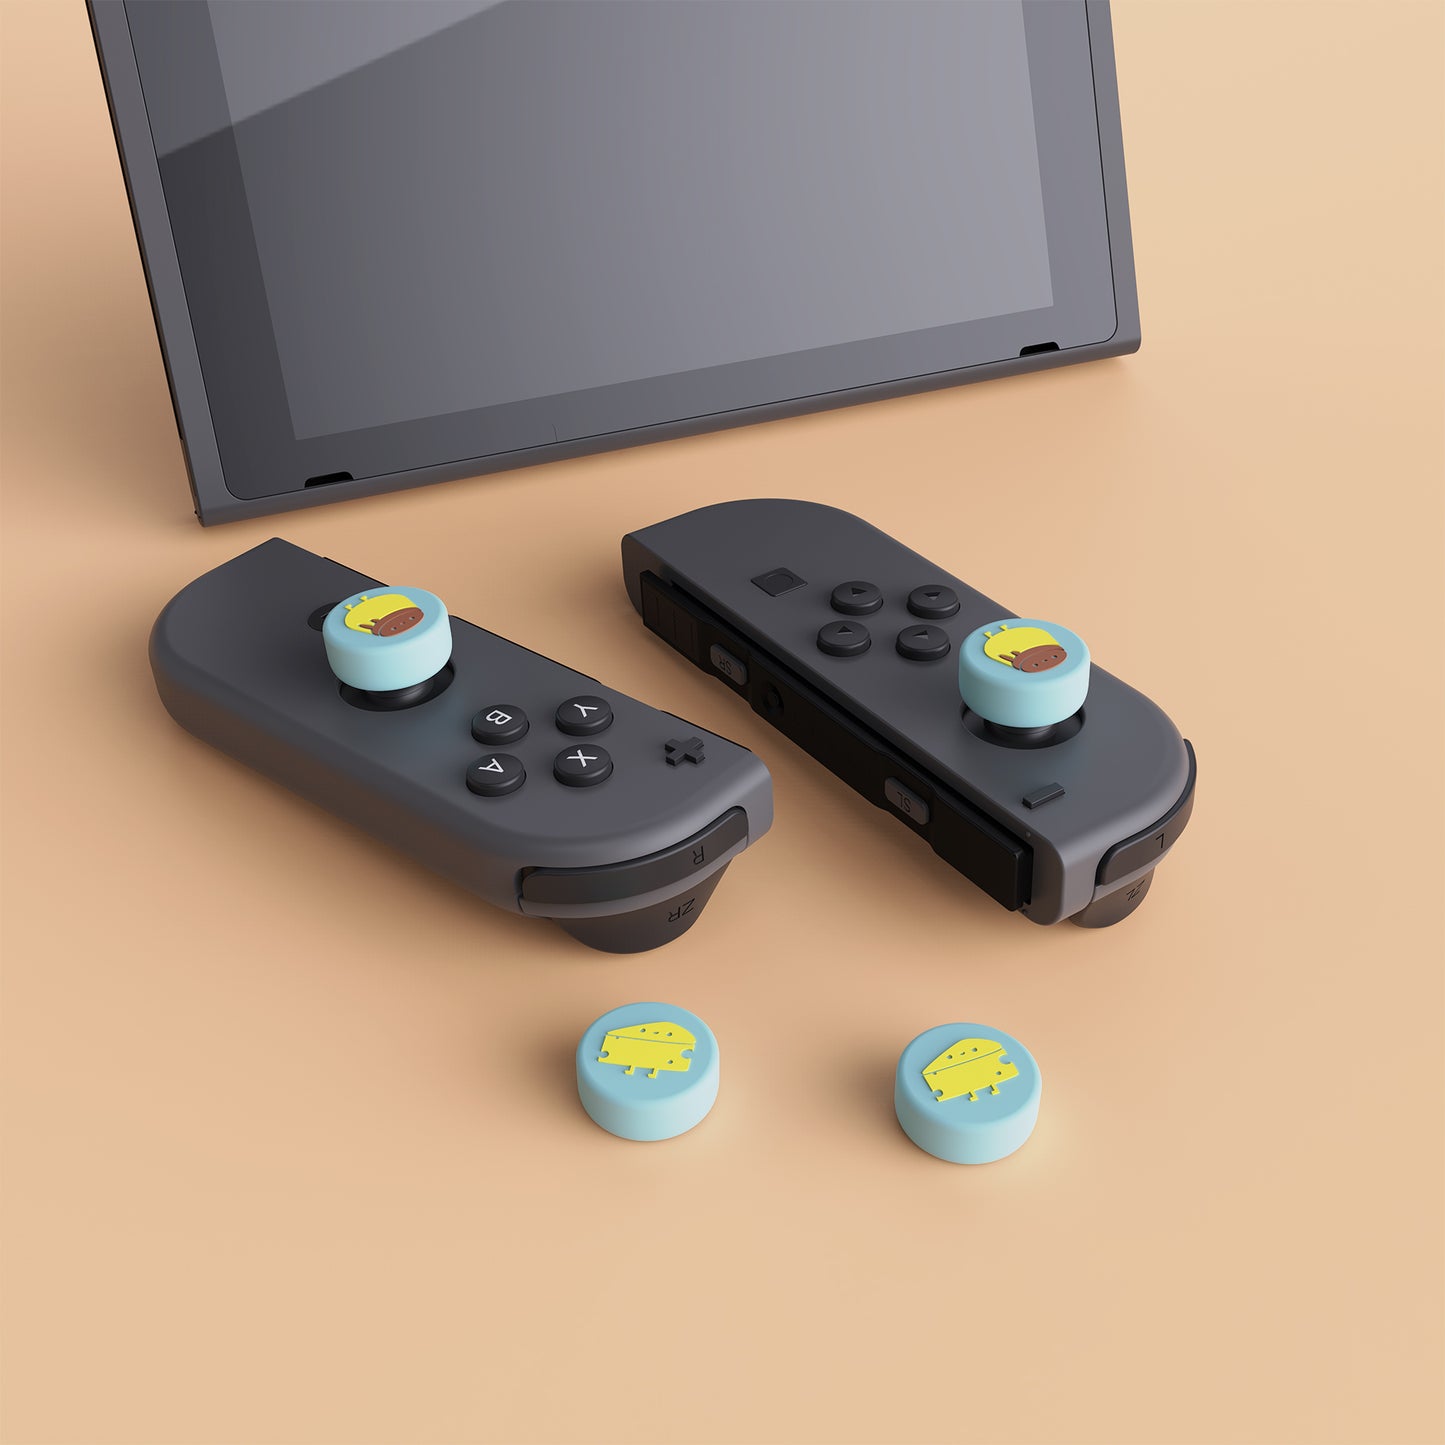 PlayVital Cheese & Pudding Cute Switch Thumb Grip Caps, Joystick Caps for Nintendo Switch Lite, Silicone Analog Cover Thumbstick Grips for Switch OLED Joycon - Heaven Blue - NJM1096 playvital